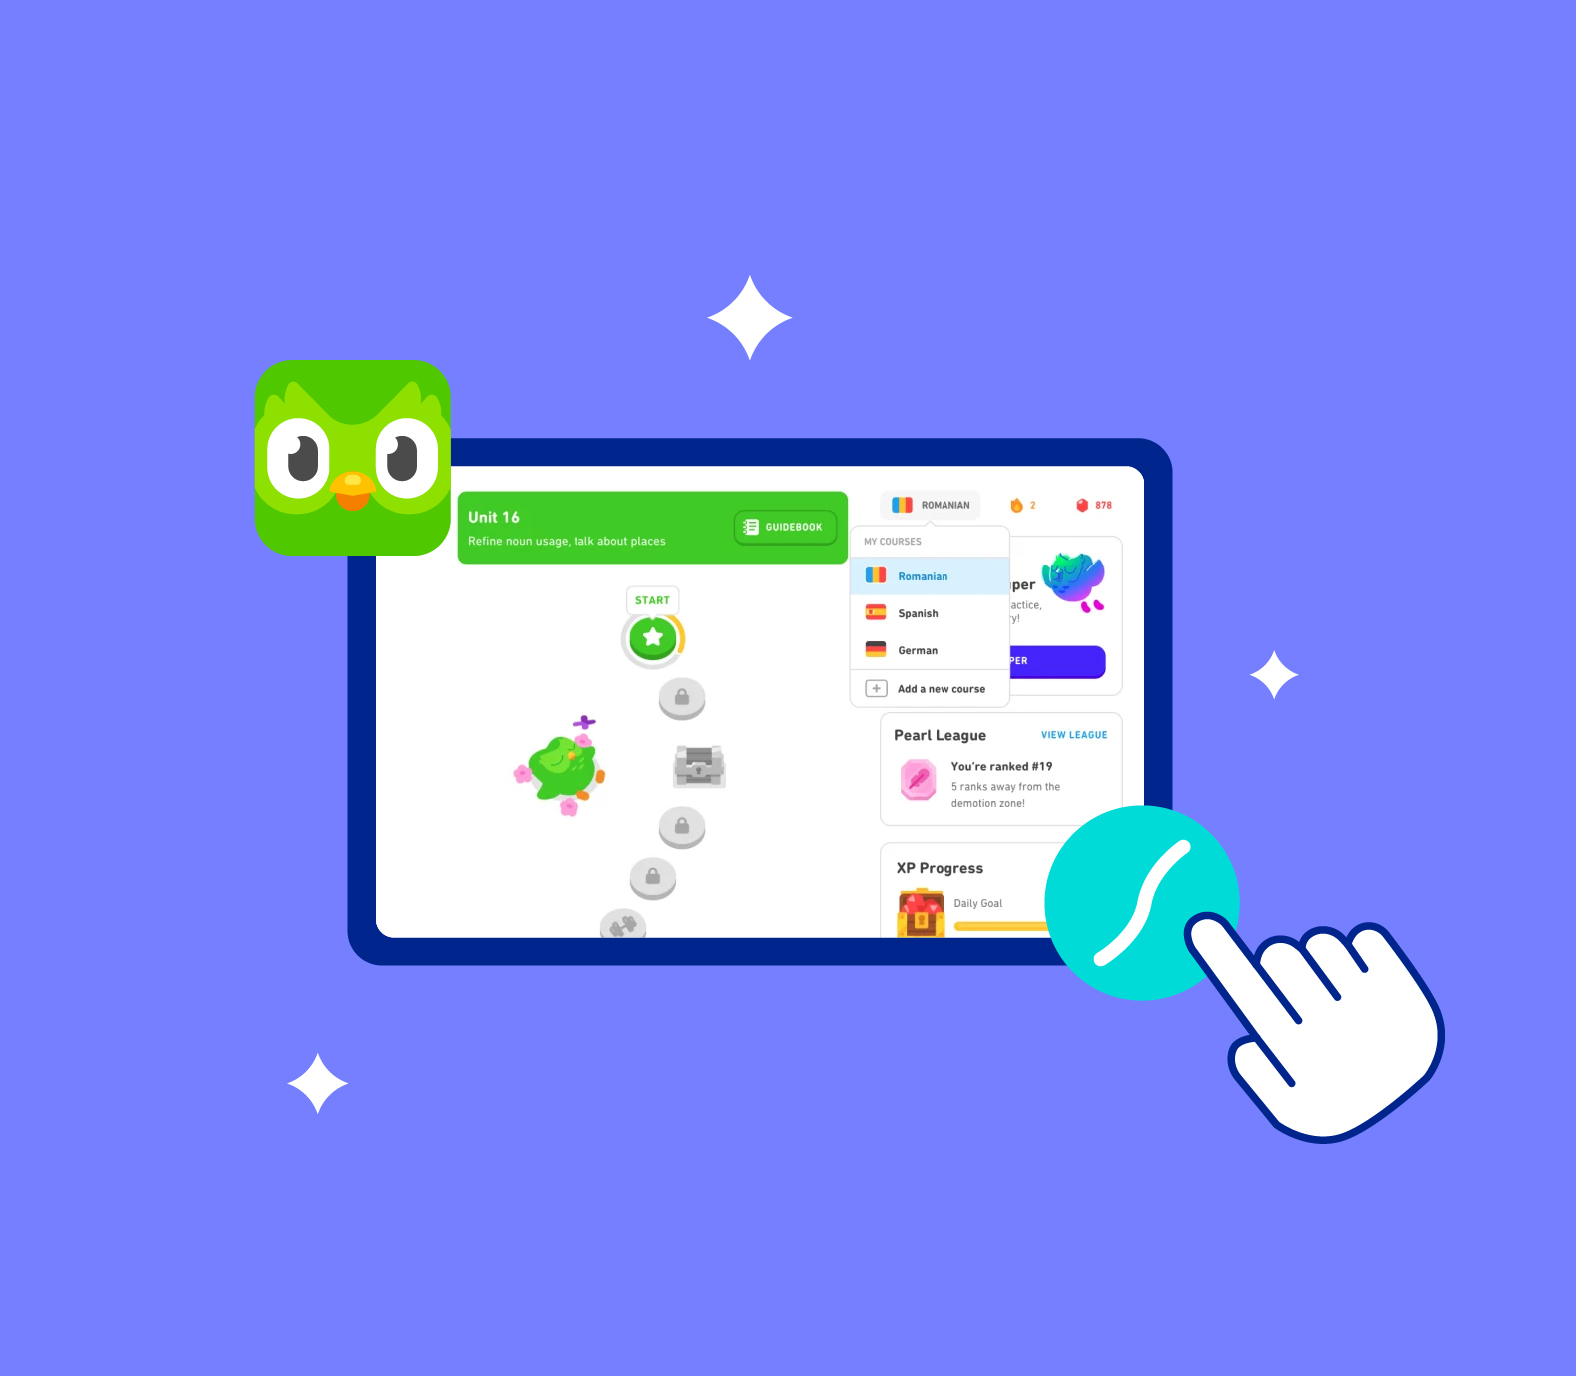 How Lottie Makes It Fun For Duolingo Users To Learn A Language